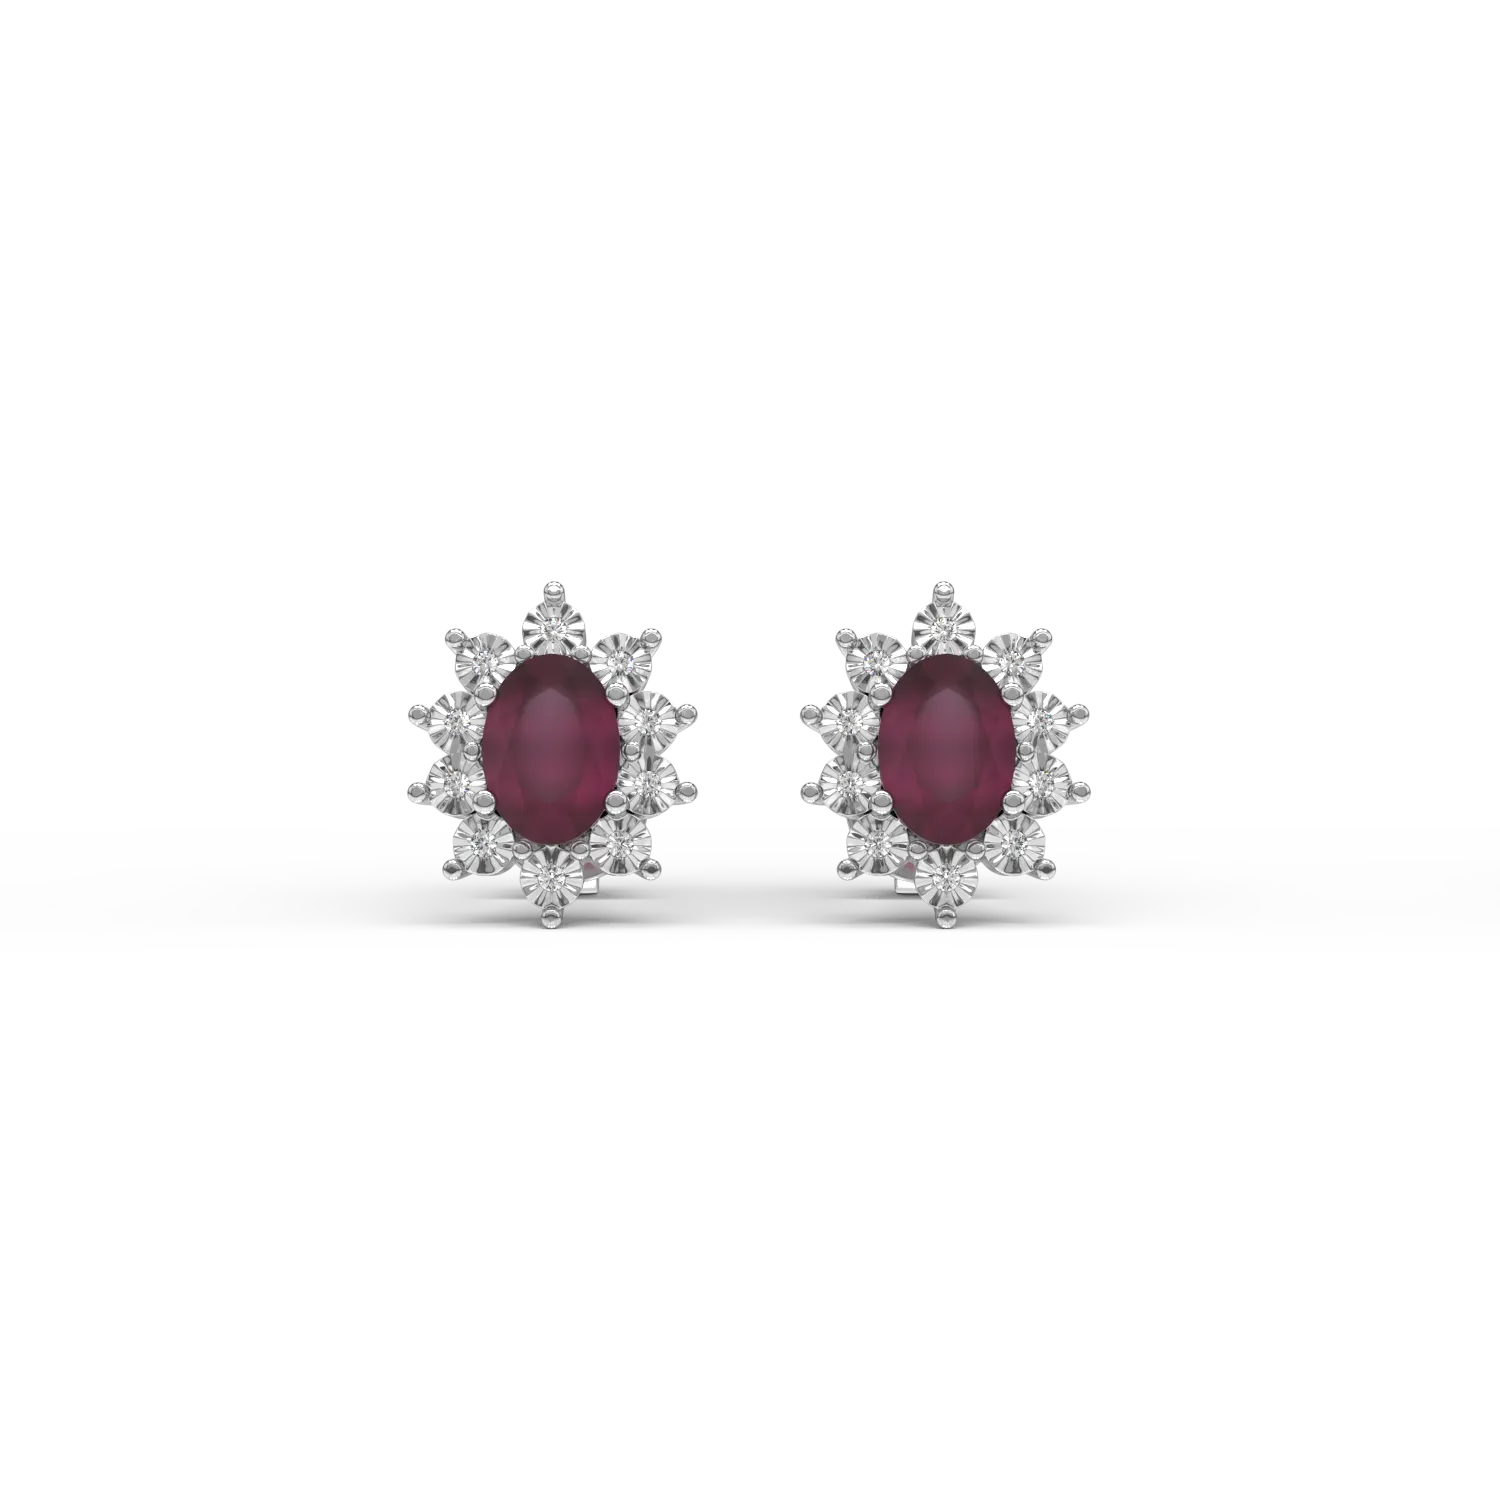 14K white gold earrings with 1.96ct rubines and 0.05ct diamonds